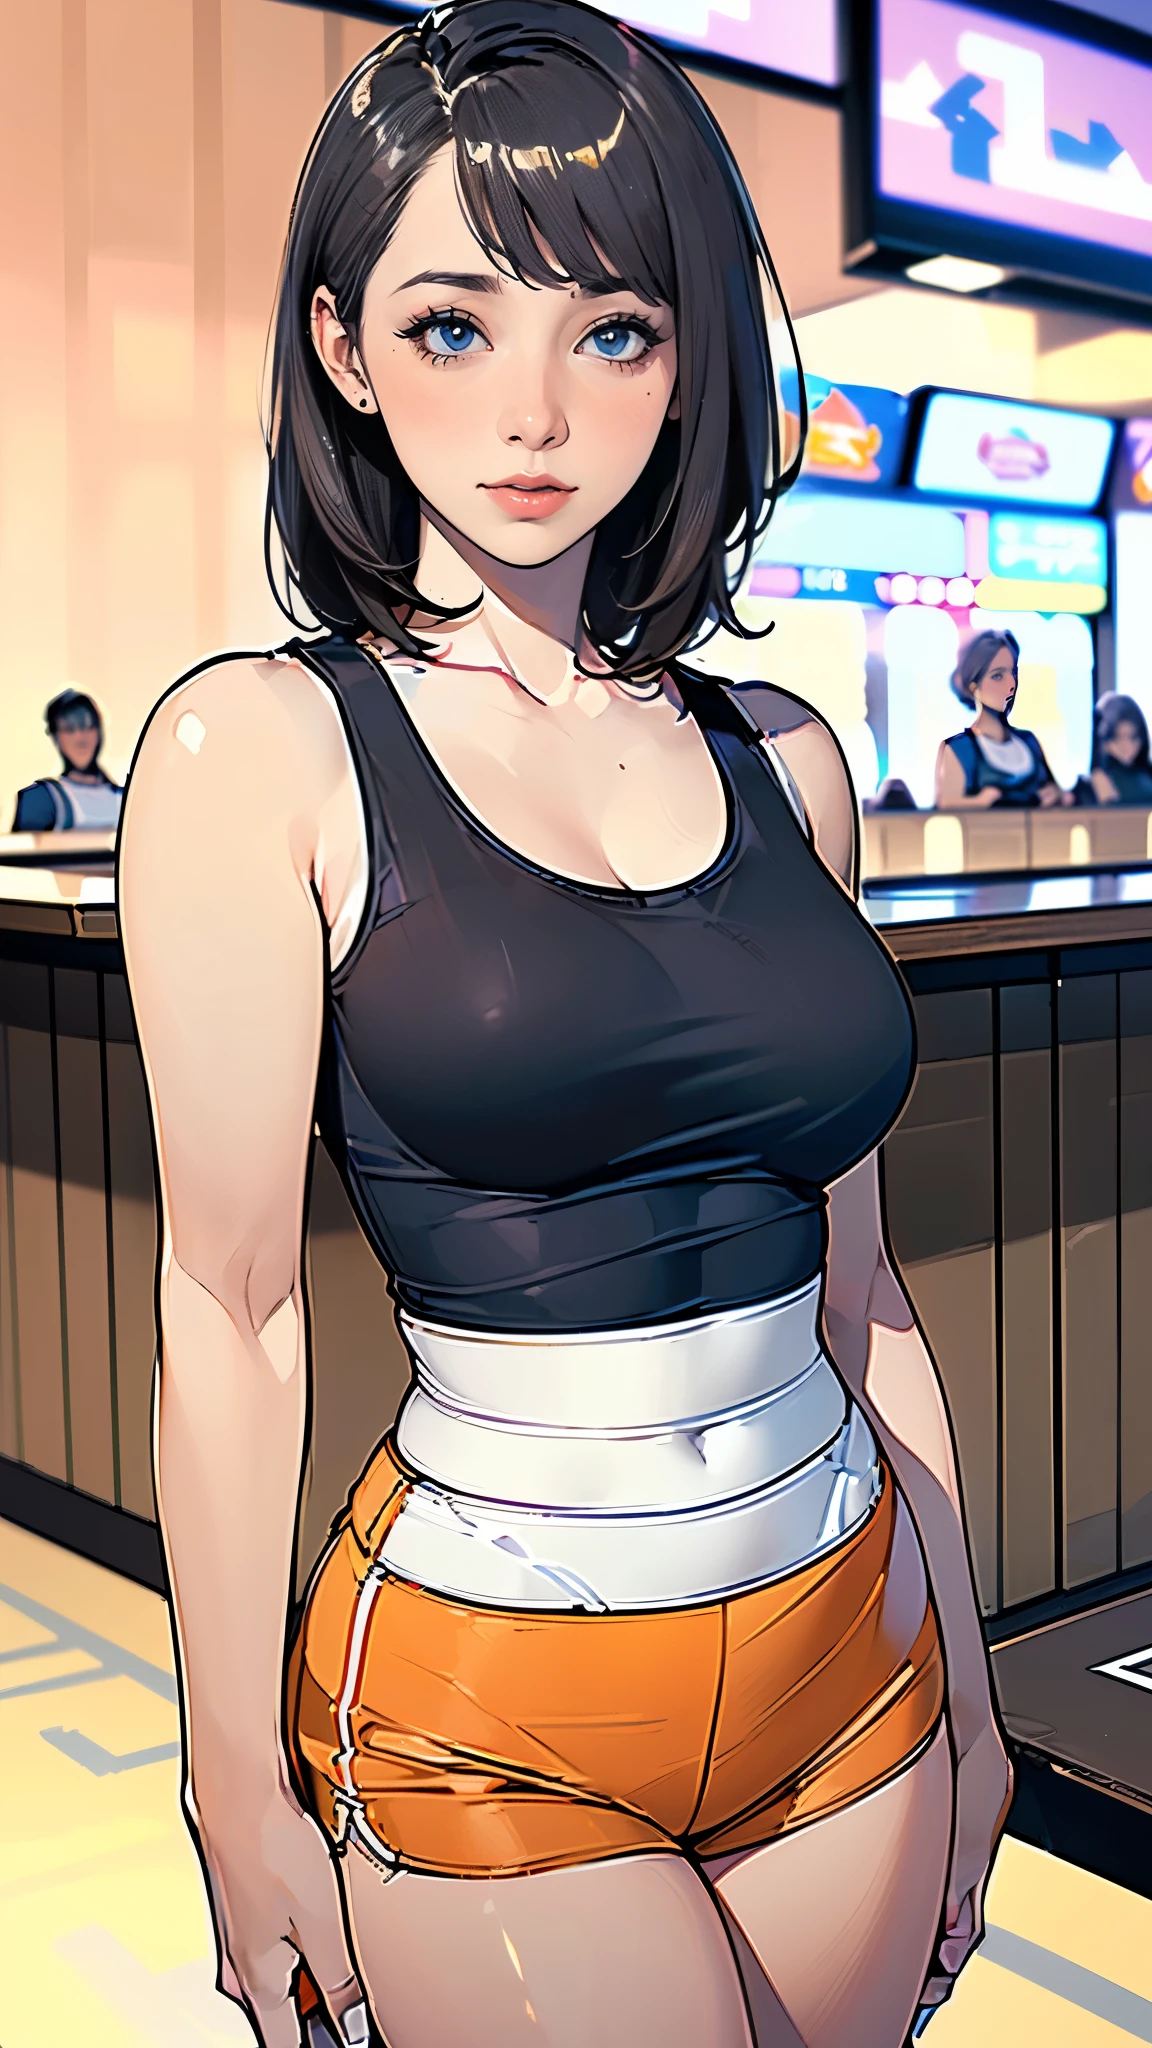 masterpiece,highest quality,Very detailed,High resolution,8K,wallpaper,Perfect lighting,BREAK(One Woman),(Mature woman working as a waiter at a sports bar:1.5),(50 years old),(hooters),(((A very form fitting white tank top:1.5))),((The tank top has the logo of a sports bar on it.:1.5)),(((tiny orange shorts))),(((Very detailed costume drawings:1.5))),(Beautiful Eyes:1.5),(Detailed face drawing:1.5),(Detailed face drawing:1.5),((Very detailed female hand:1.5)),(Shiny skin:1.2),(Big Breasts:1.2),(Thick thighs:1.5),(Sensual body:1.5),(Sports bar background:1.5),(((Blur the background:1.5))),(((I&#39;m embarrassed:1.5)))